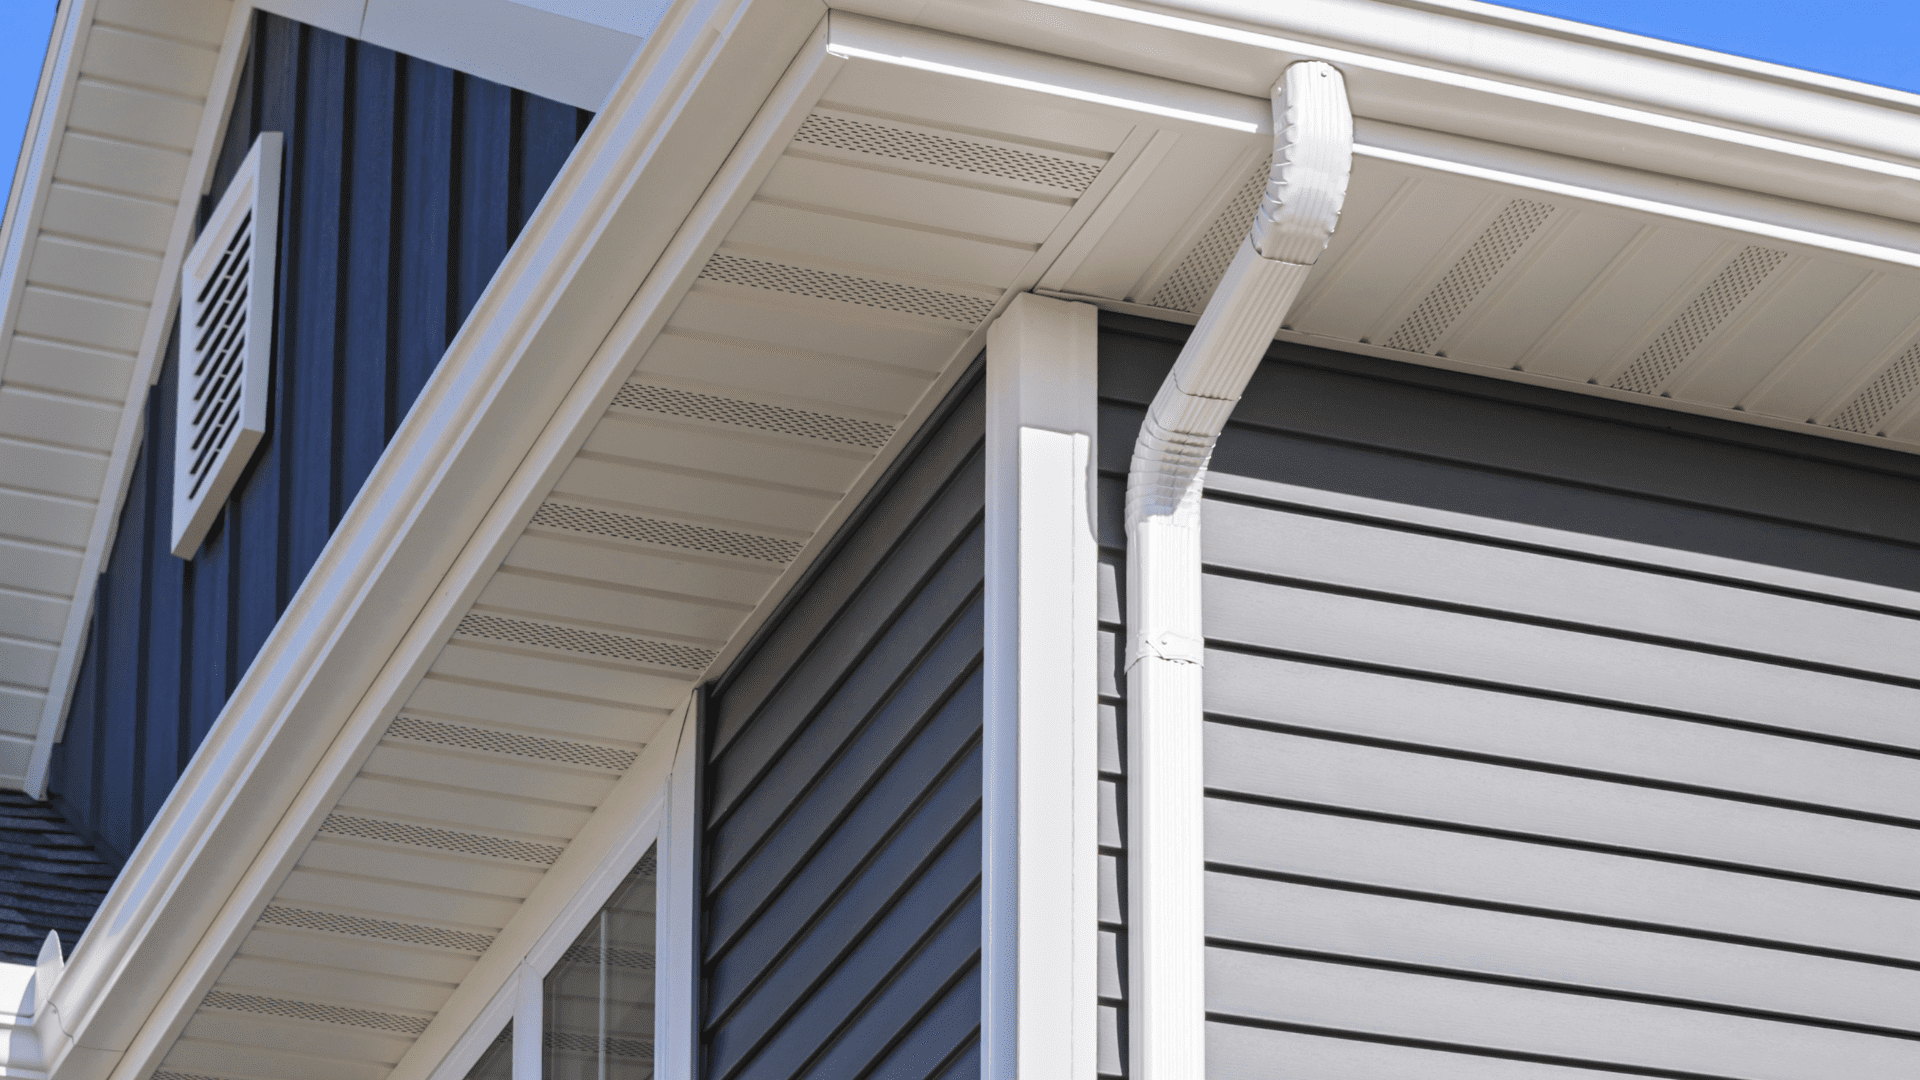 Why are soffits and fascia important on homes in Florida?